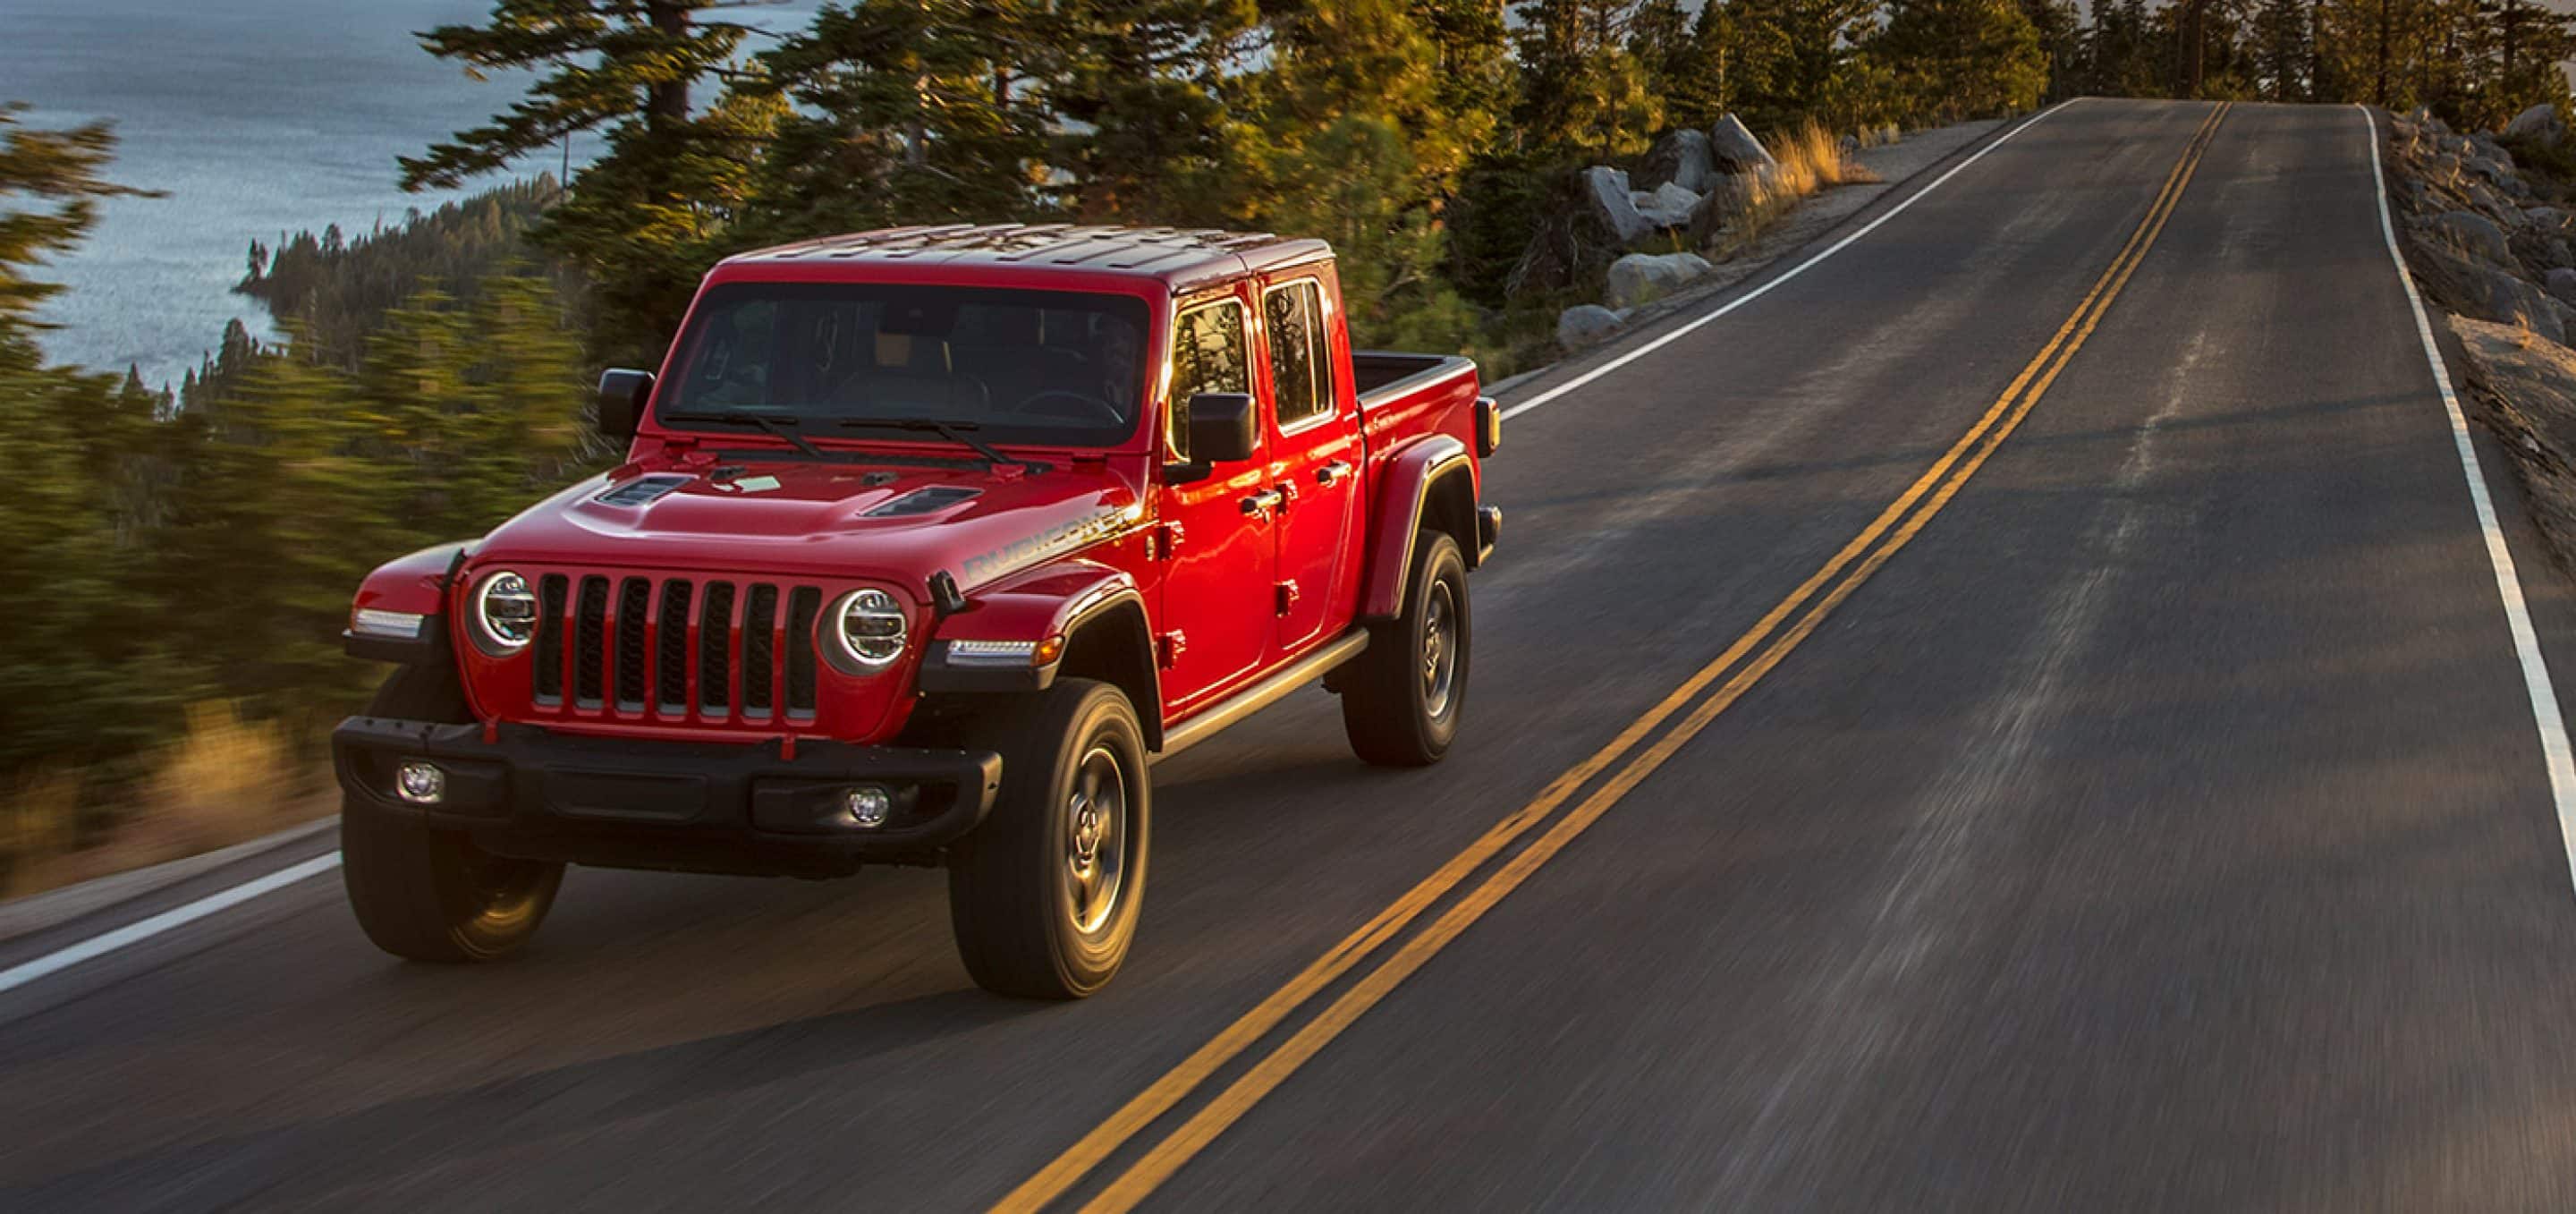 Trim Levels of the 2021 Jeep Gladiator